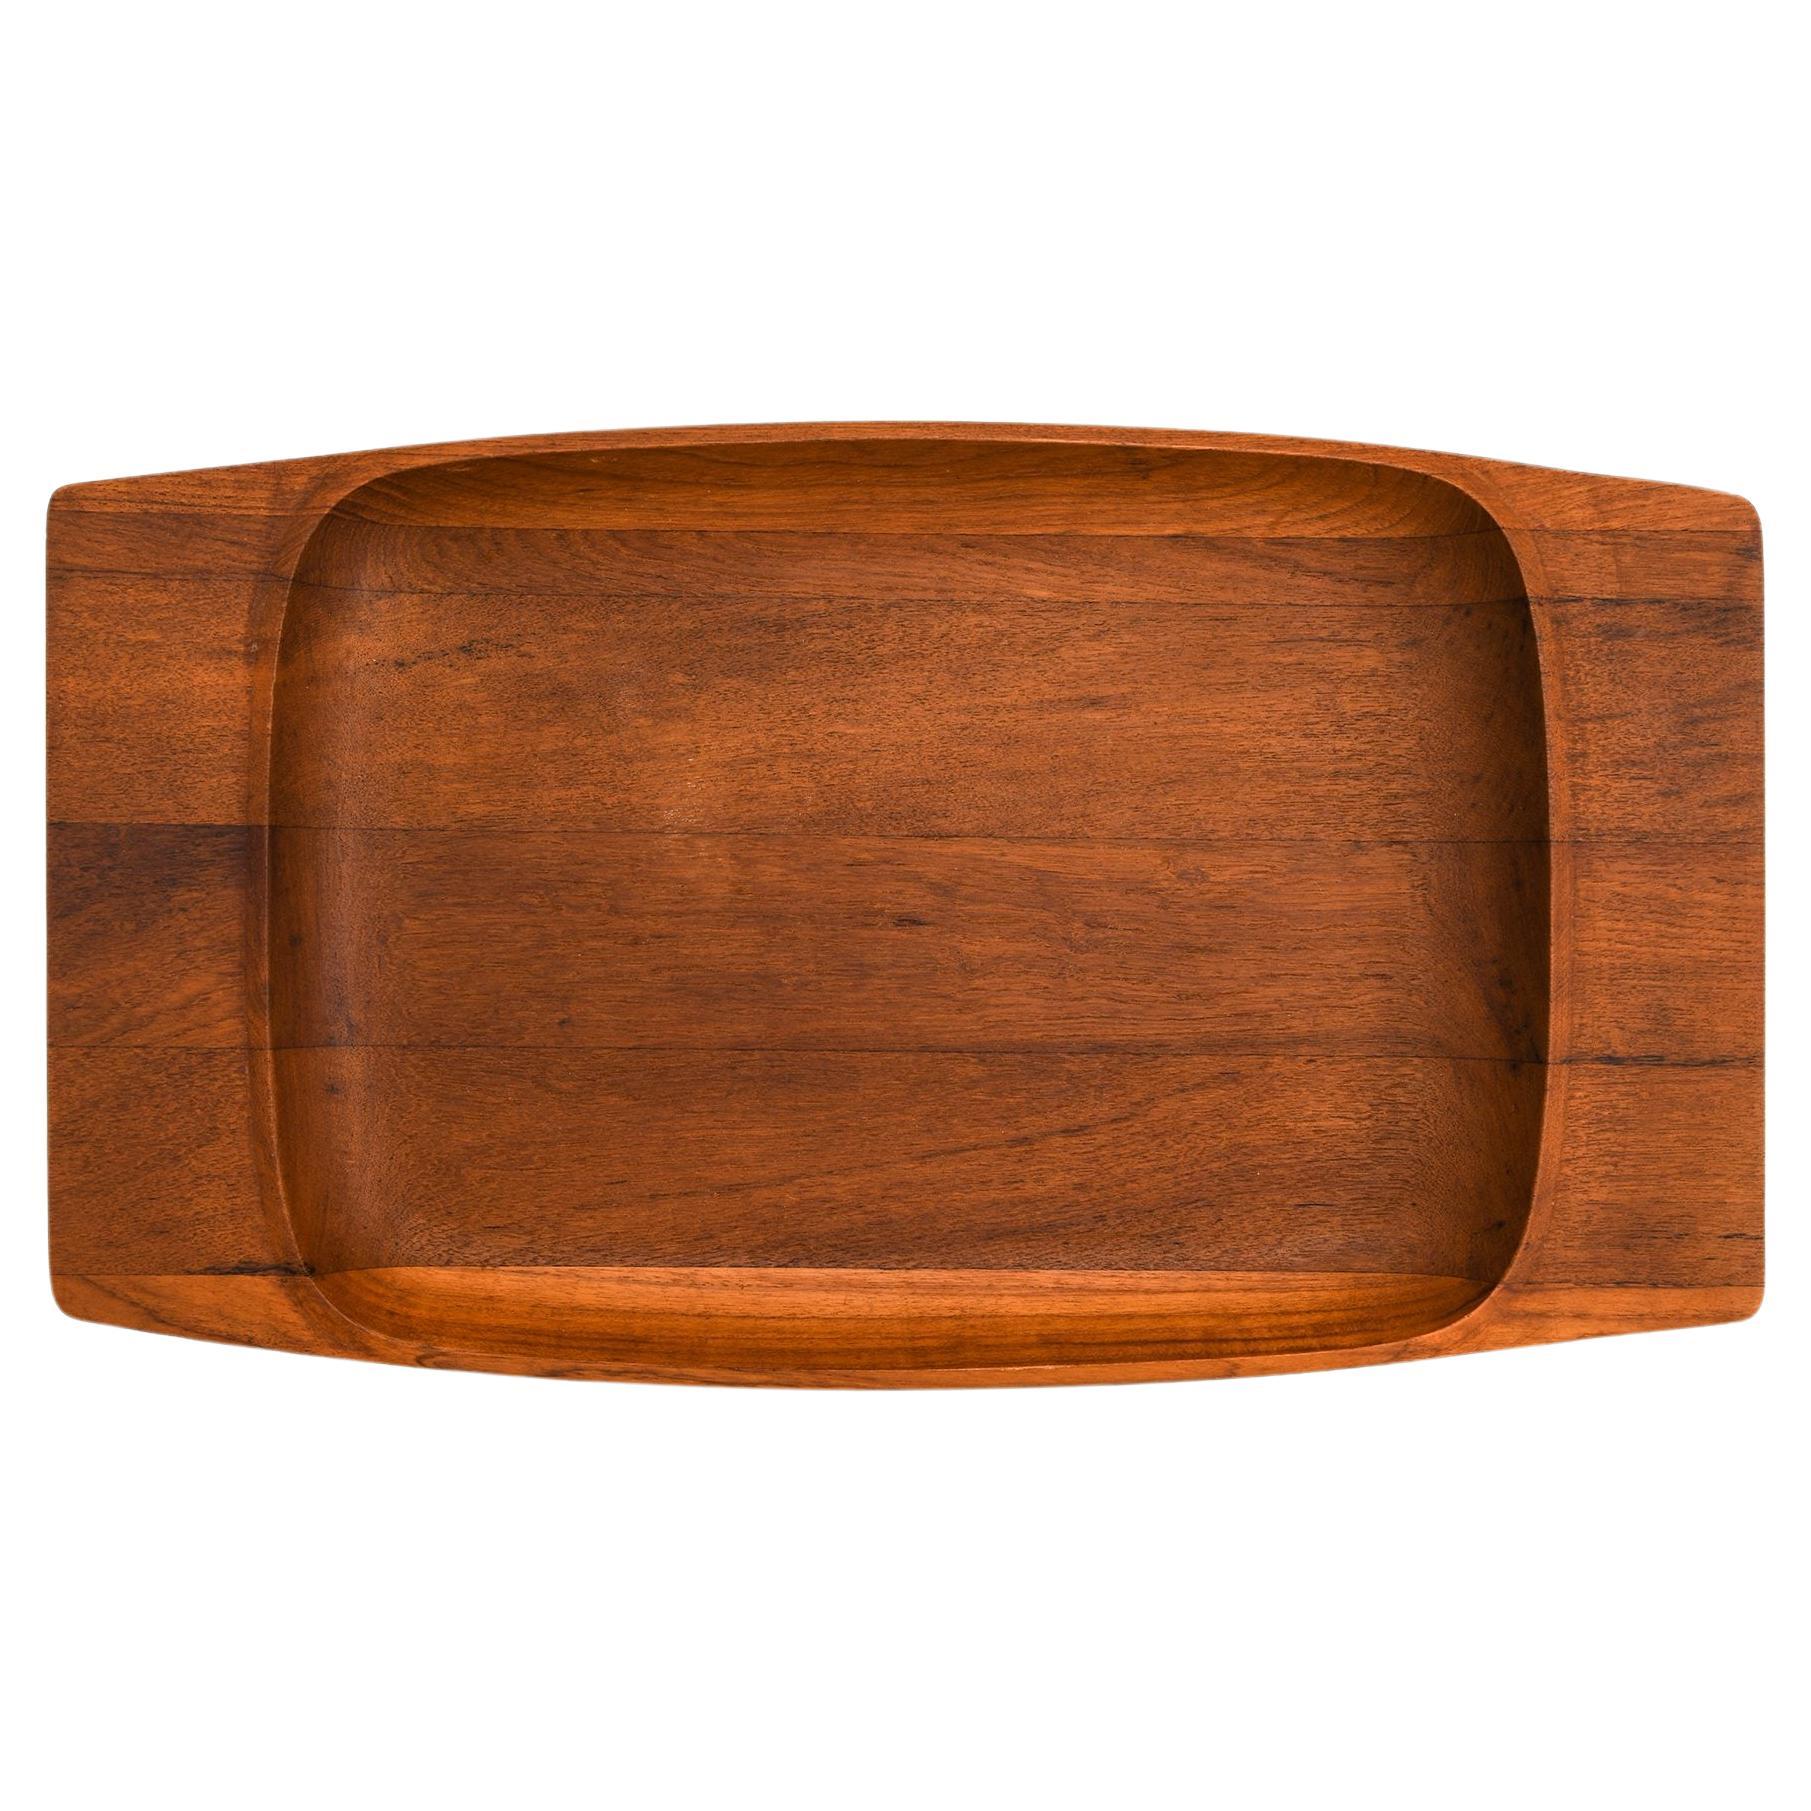 Serving Tray in Teak by Jens Quistgaard, 1950's For Sale